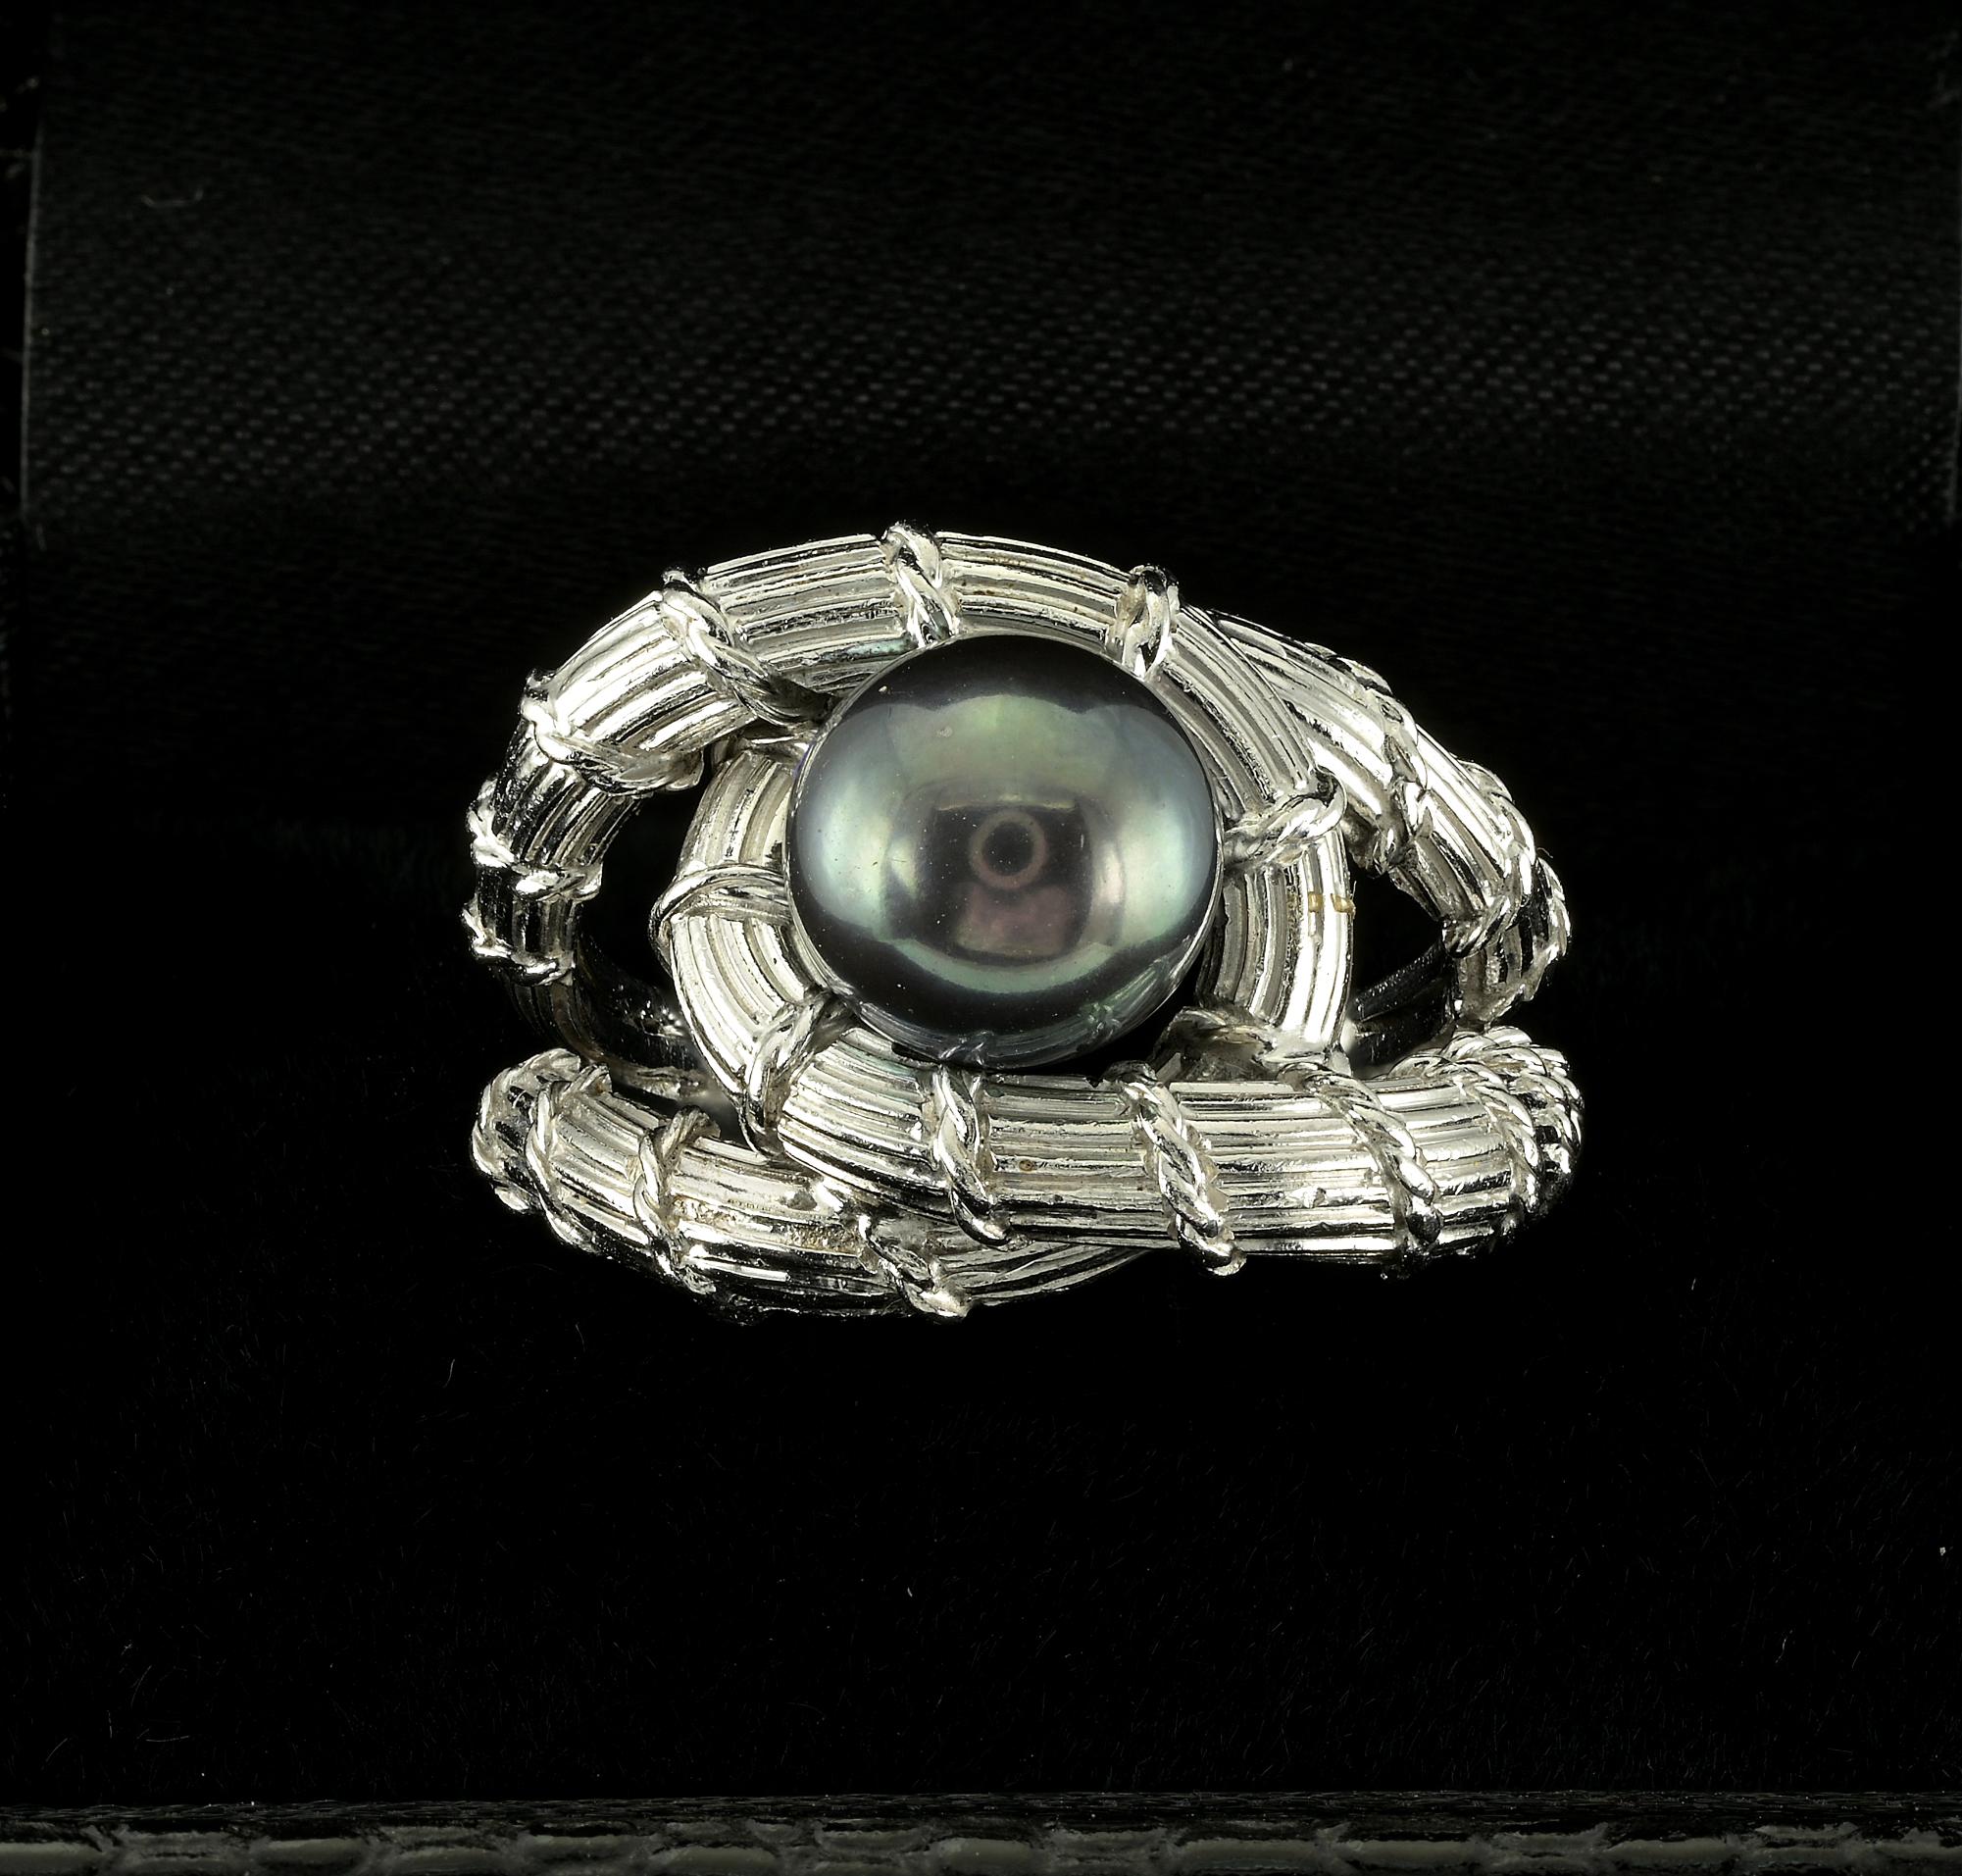 Marvelous Mid Century vintage ring of Italian origin
Ring as been hand crafted during the 50’s of solid Platinum
The fine workmanship stands out for the remarkable coiled texture design interlacing the center Black Pearl
Magnificent contrast between